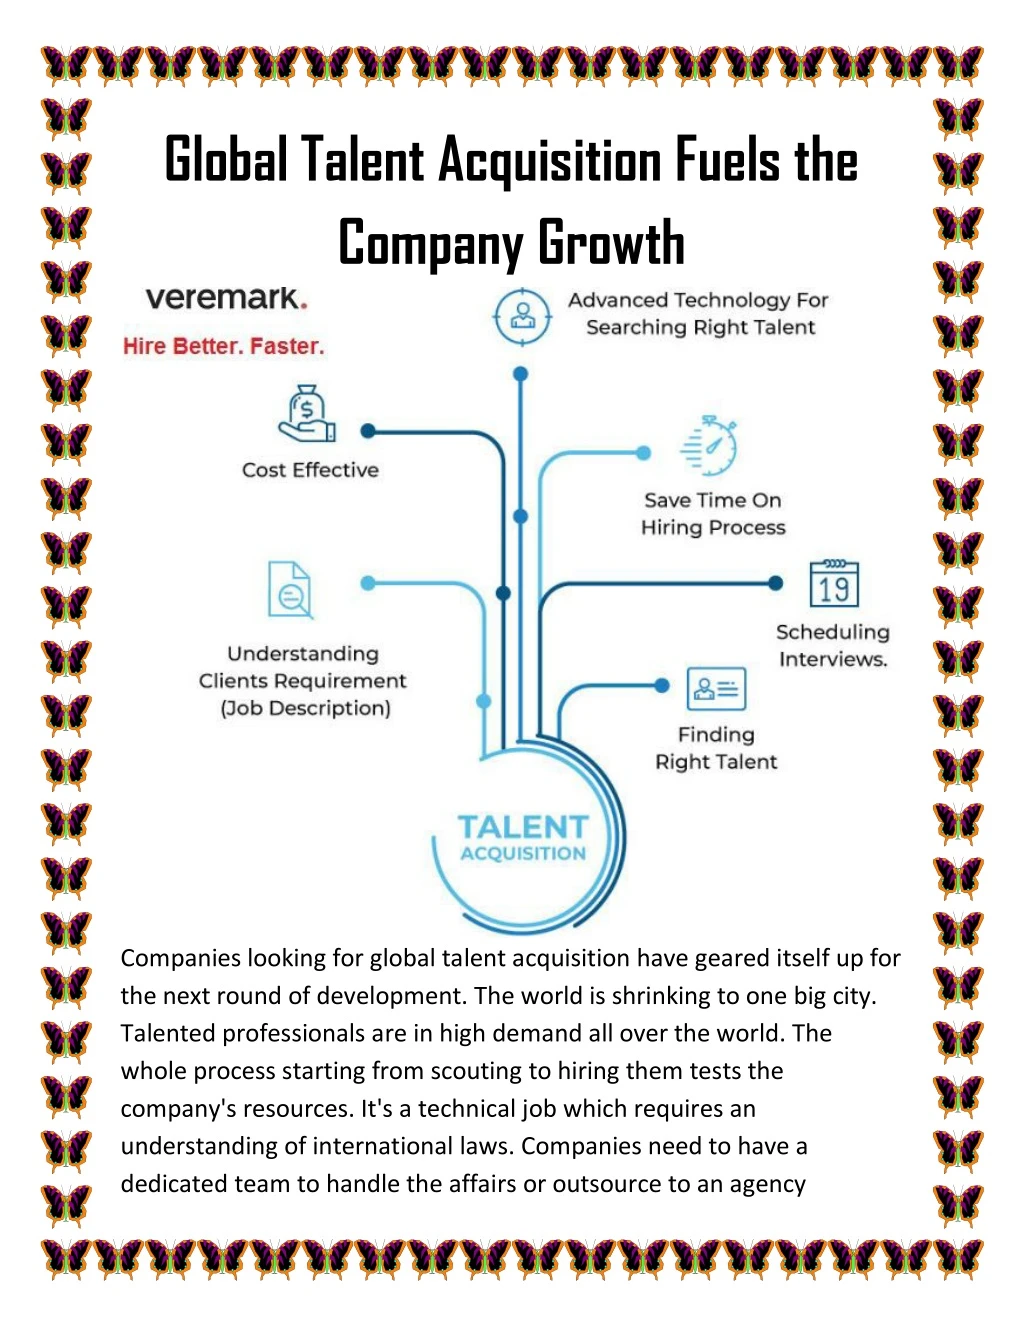 global talent acquisition fuels the company growth